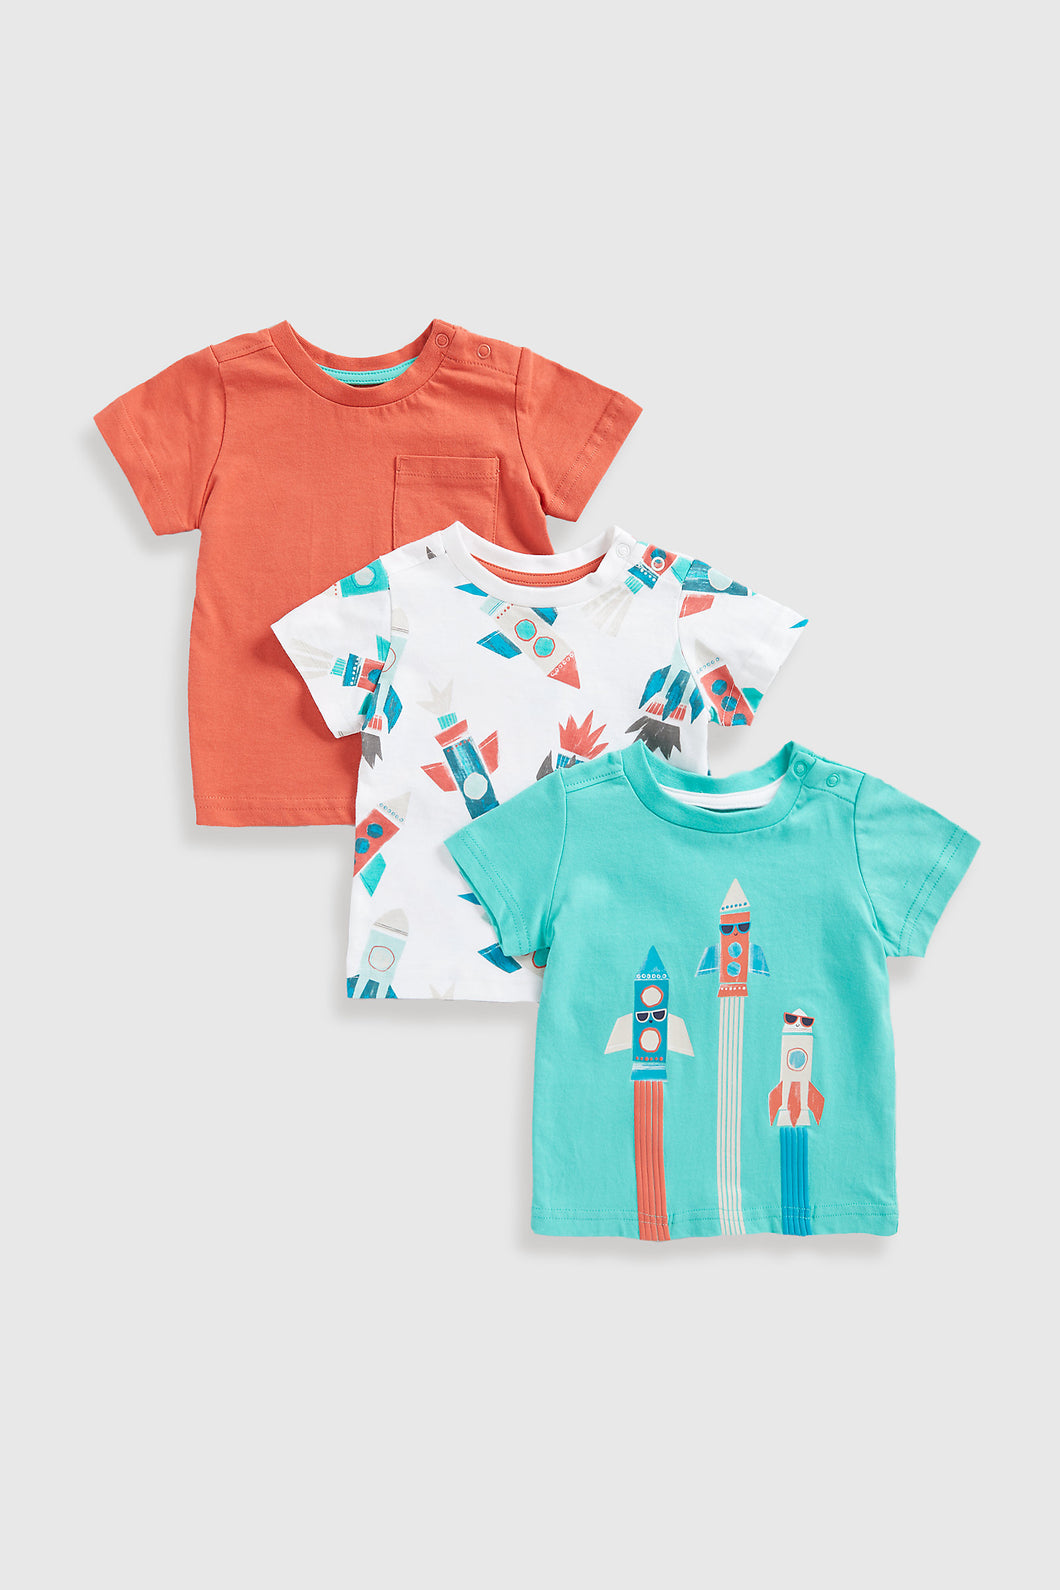 Mothercare Space T-Shirts - 3 Pack